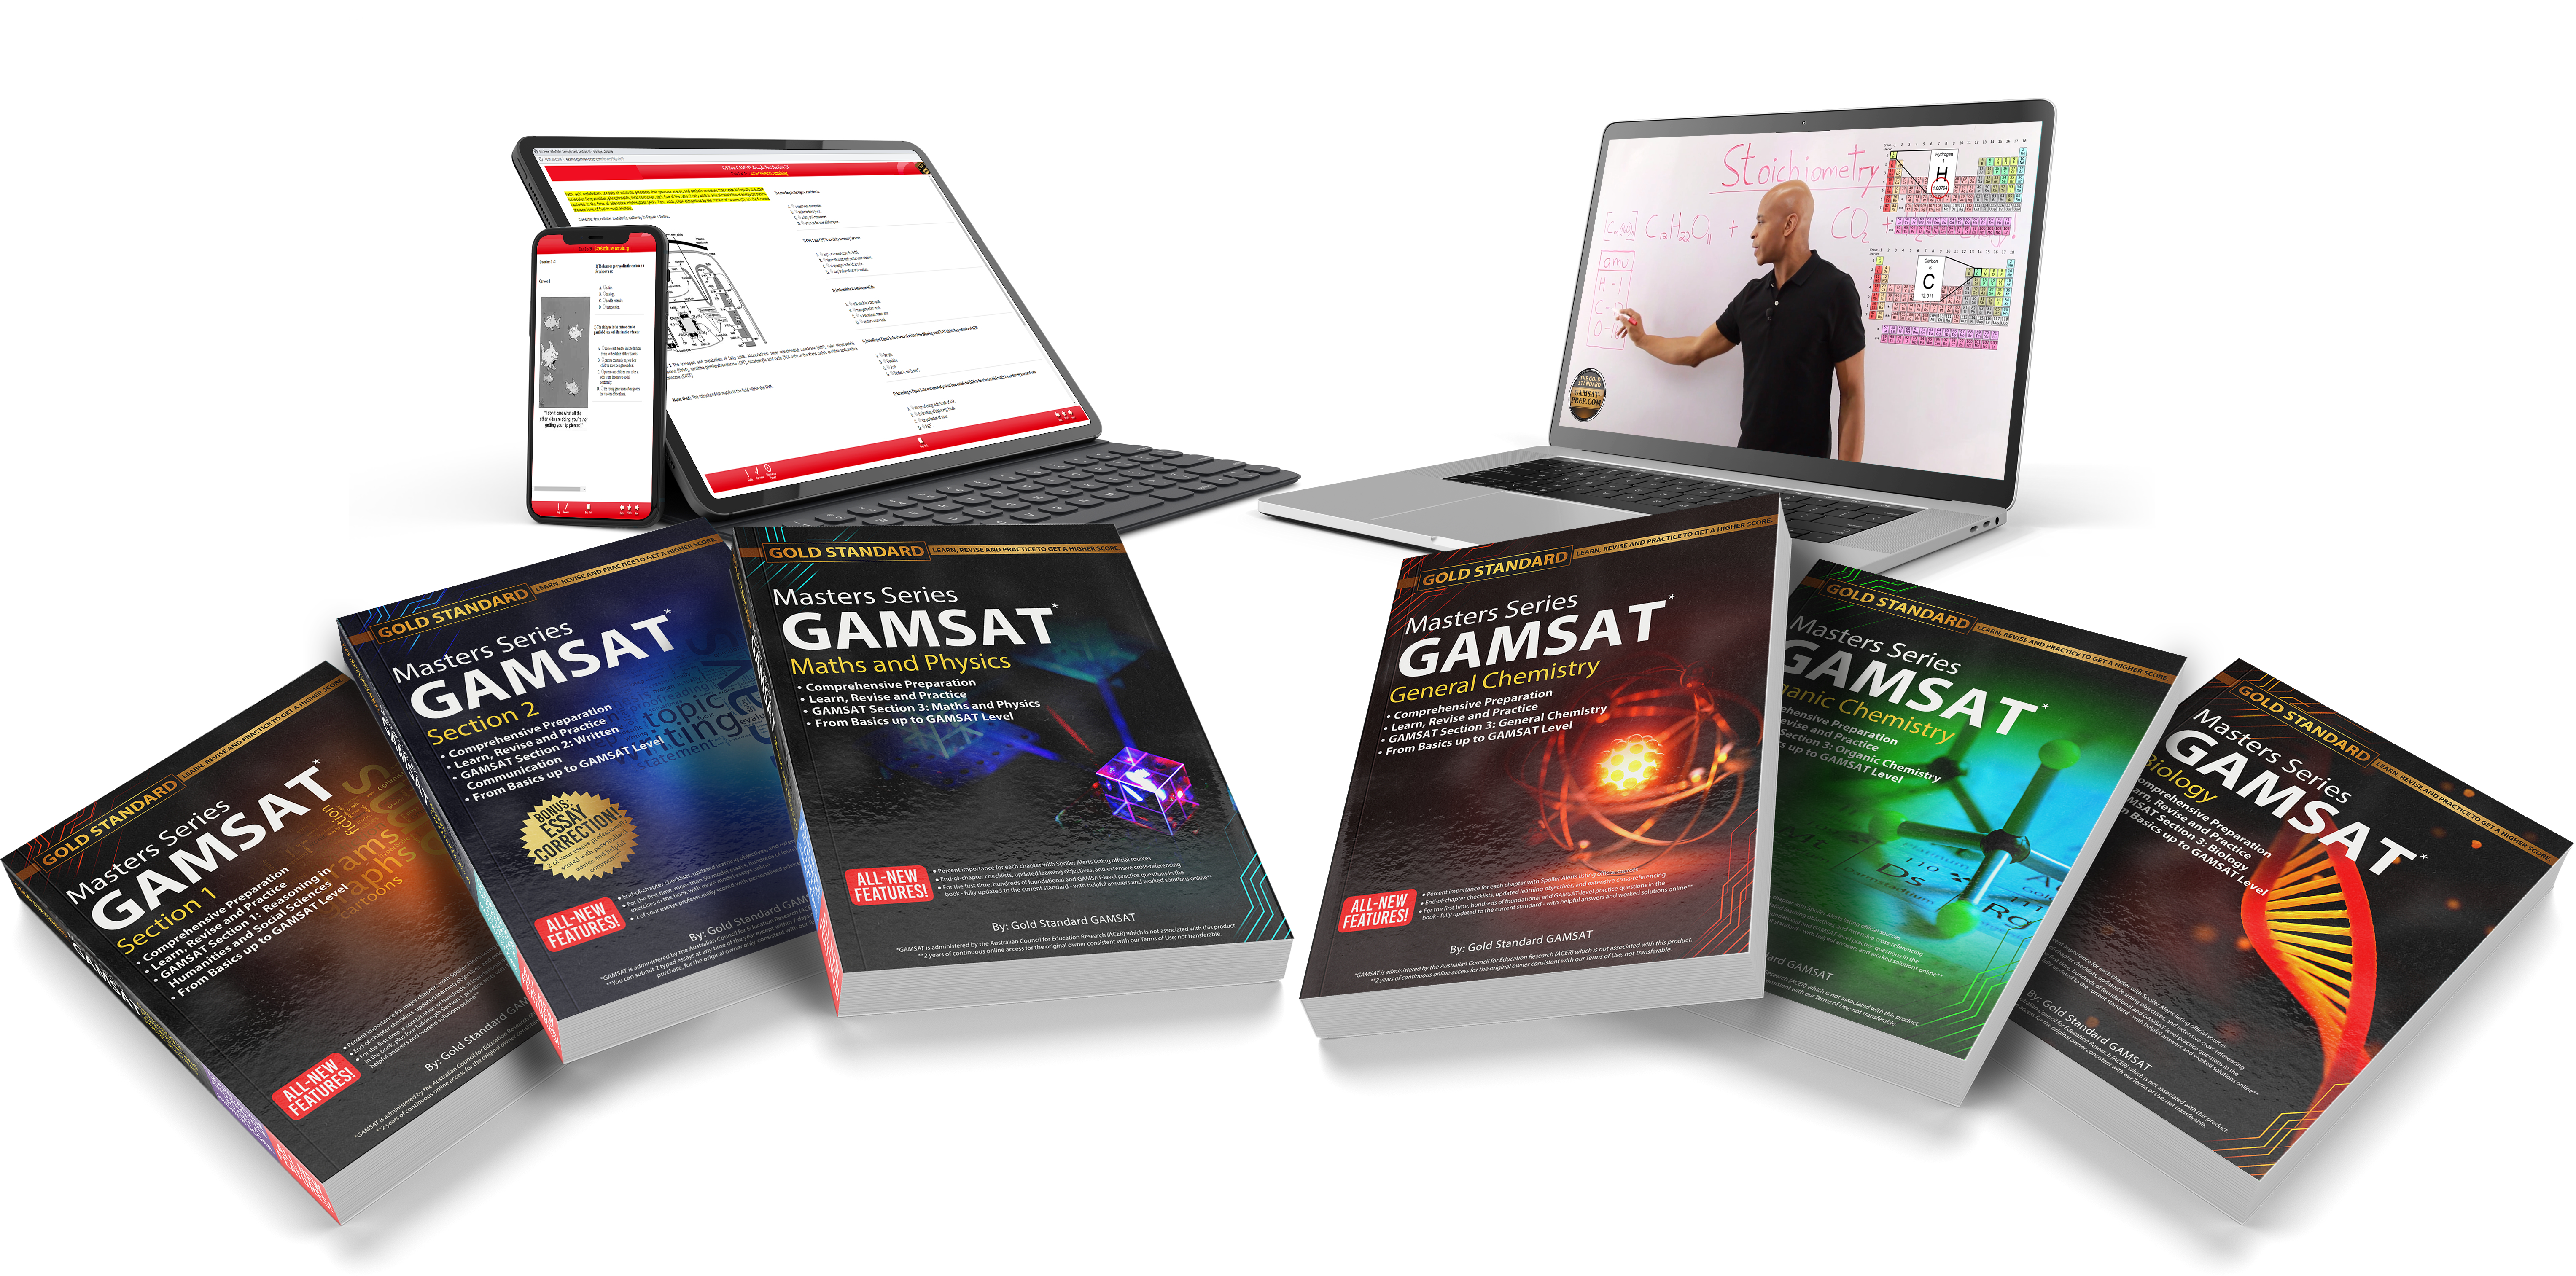 Complete GAMSAT Preparation: GAMSAT Platinum Package with GAMSAT Score Guarantee (All included)